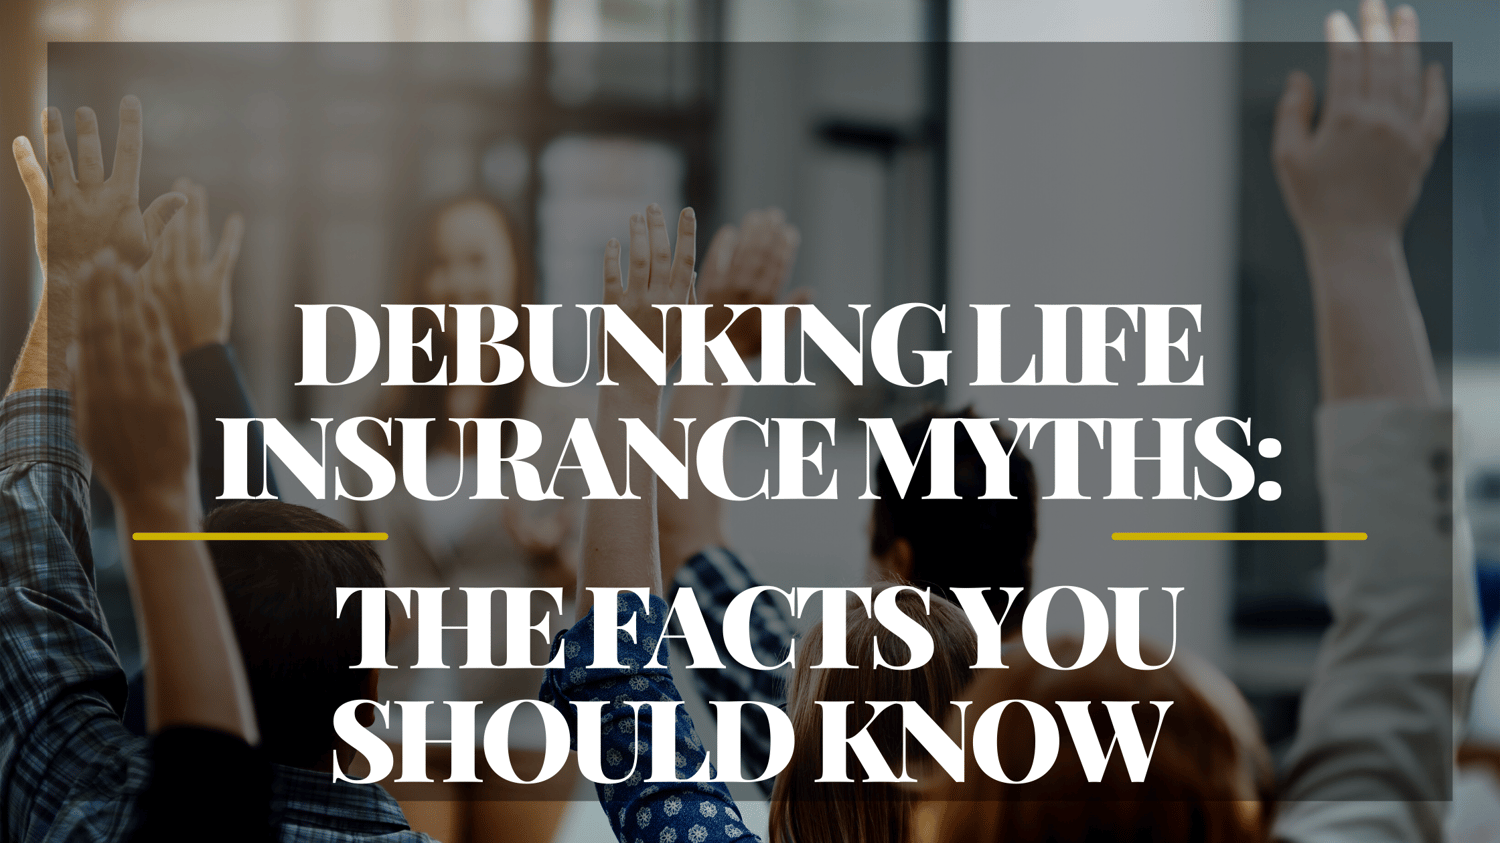 DEBUNKING LIFE INSURANCE MYTHS: THE FACTS YOU SHOULD KNOW